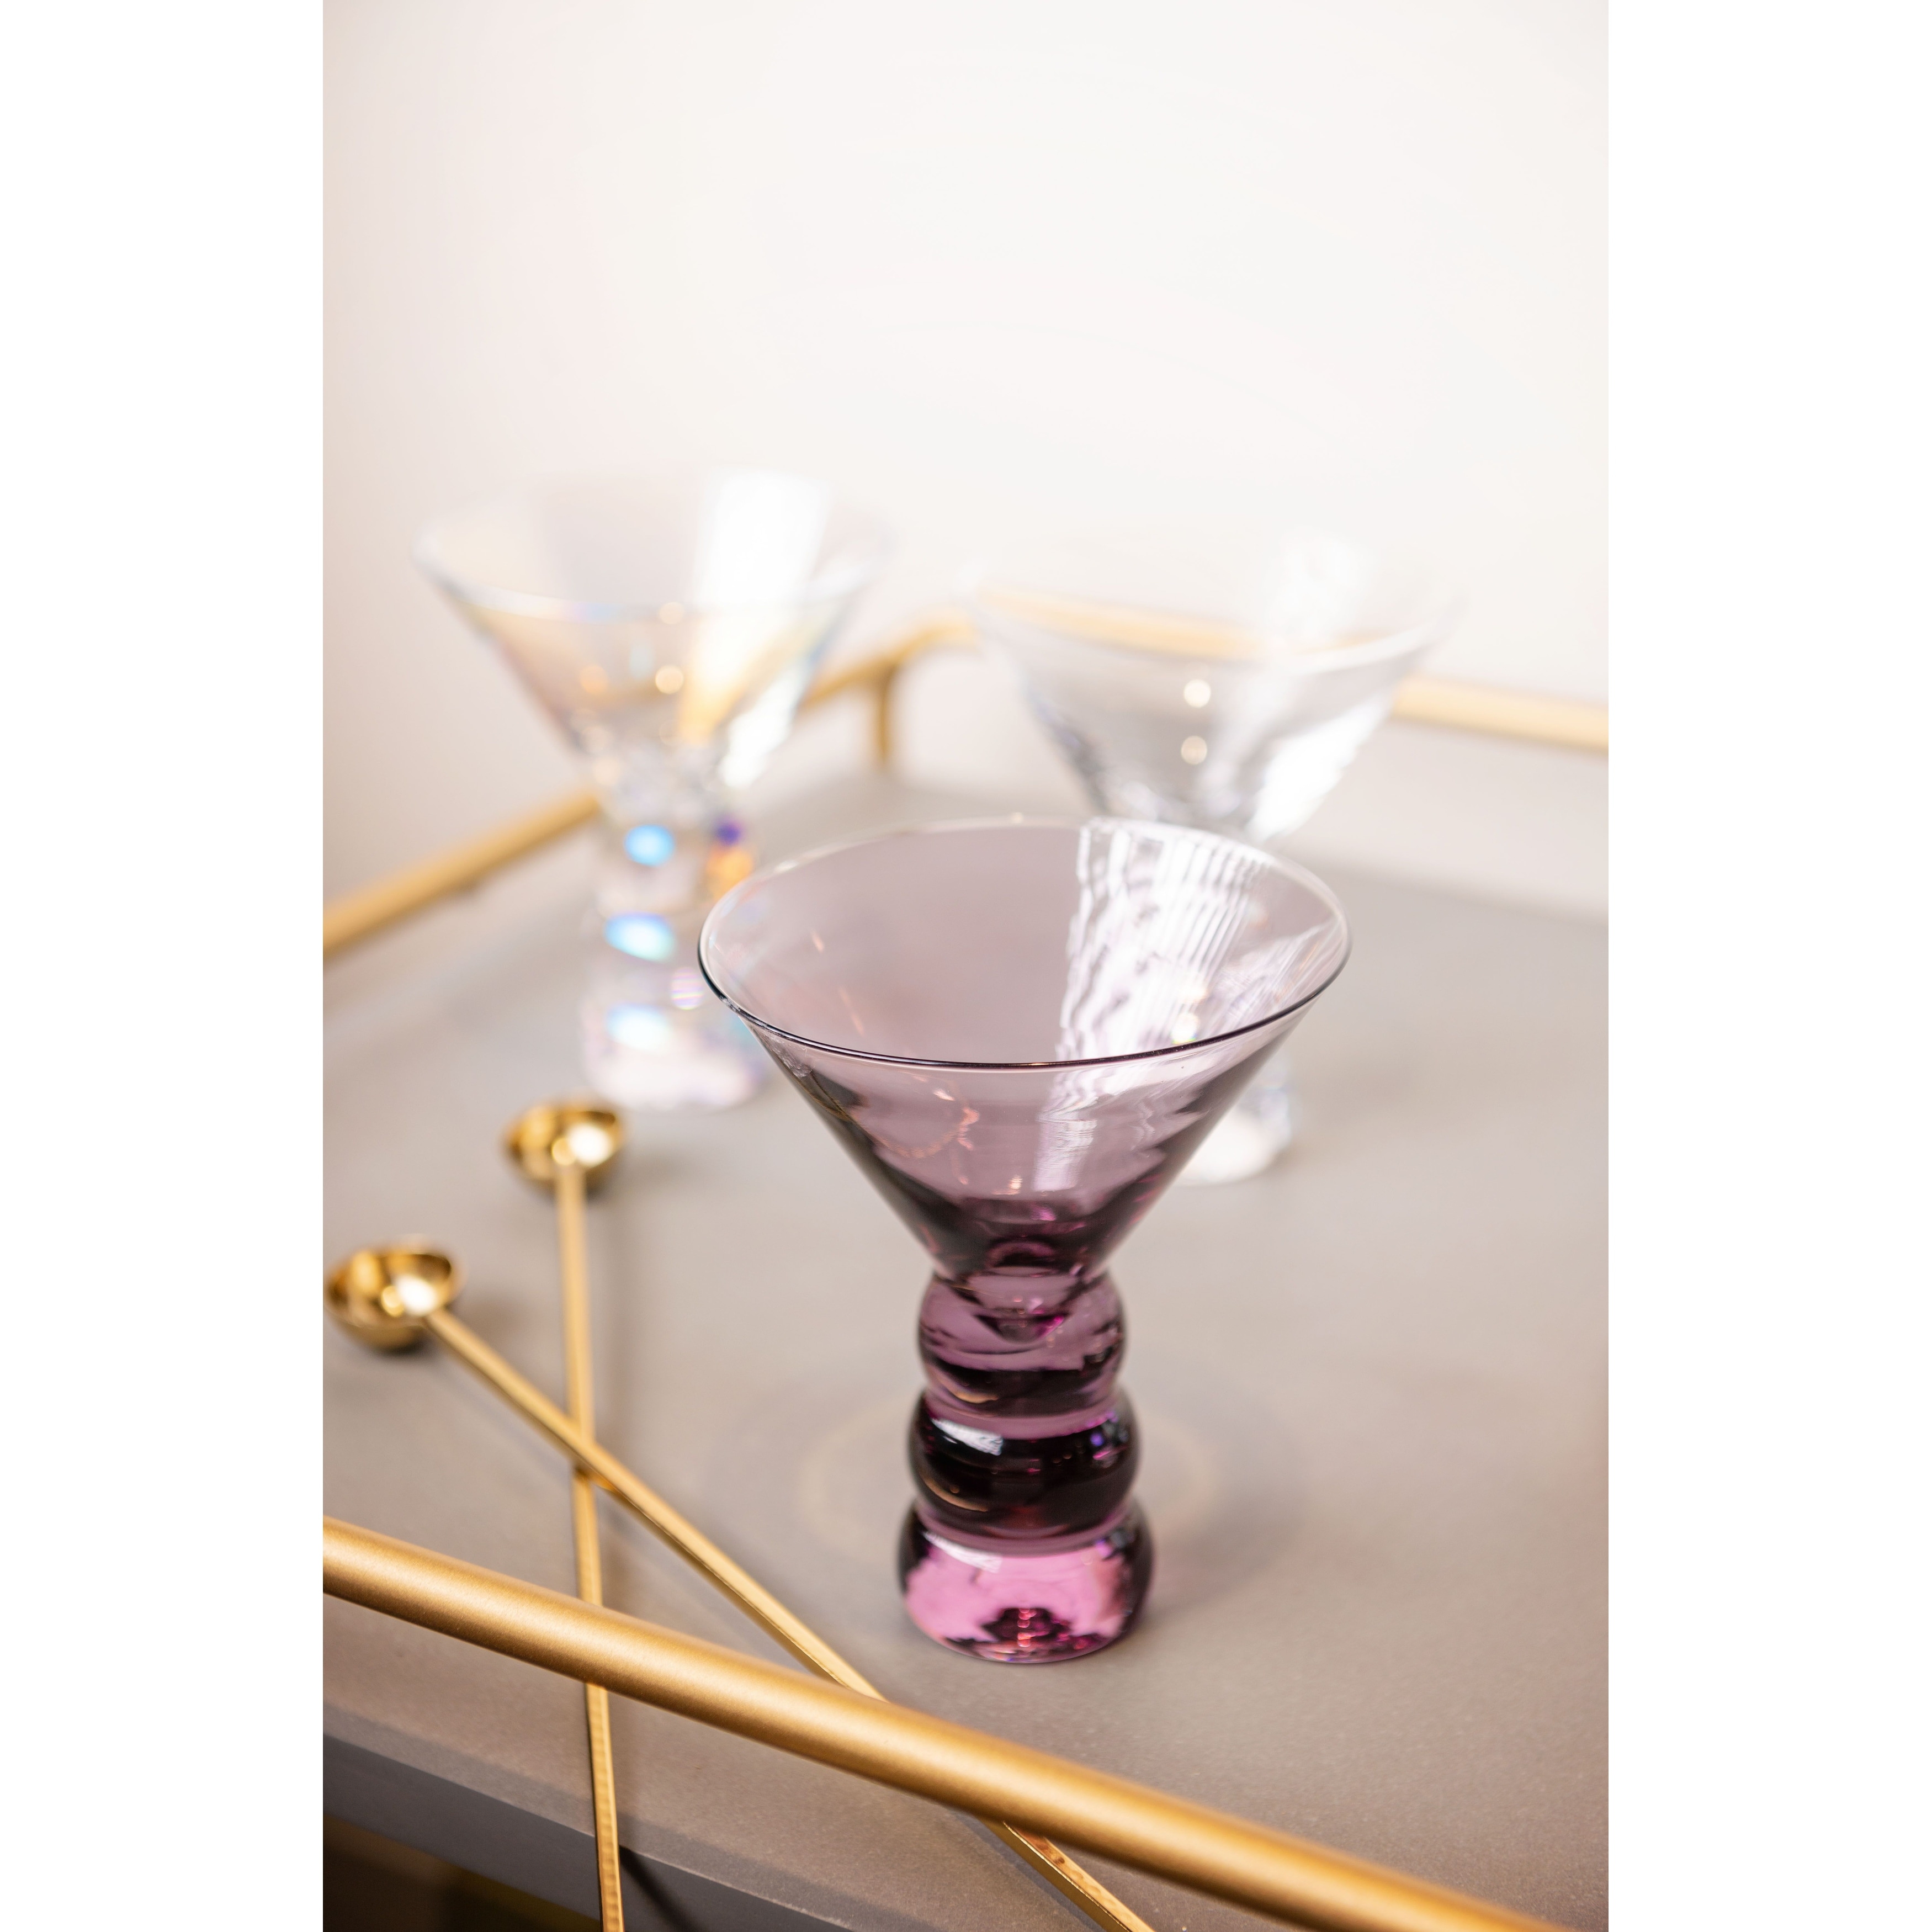 https://ak1.ostkcdn.com/images/products/is/images/direct/0d52392aa5aaaf681c5778aabcacd91715db9670/Lexi-Martini-Glasses.jpg